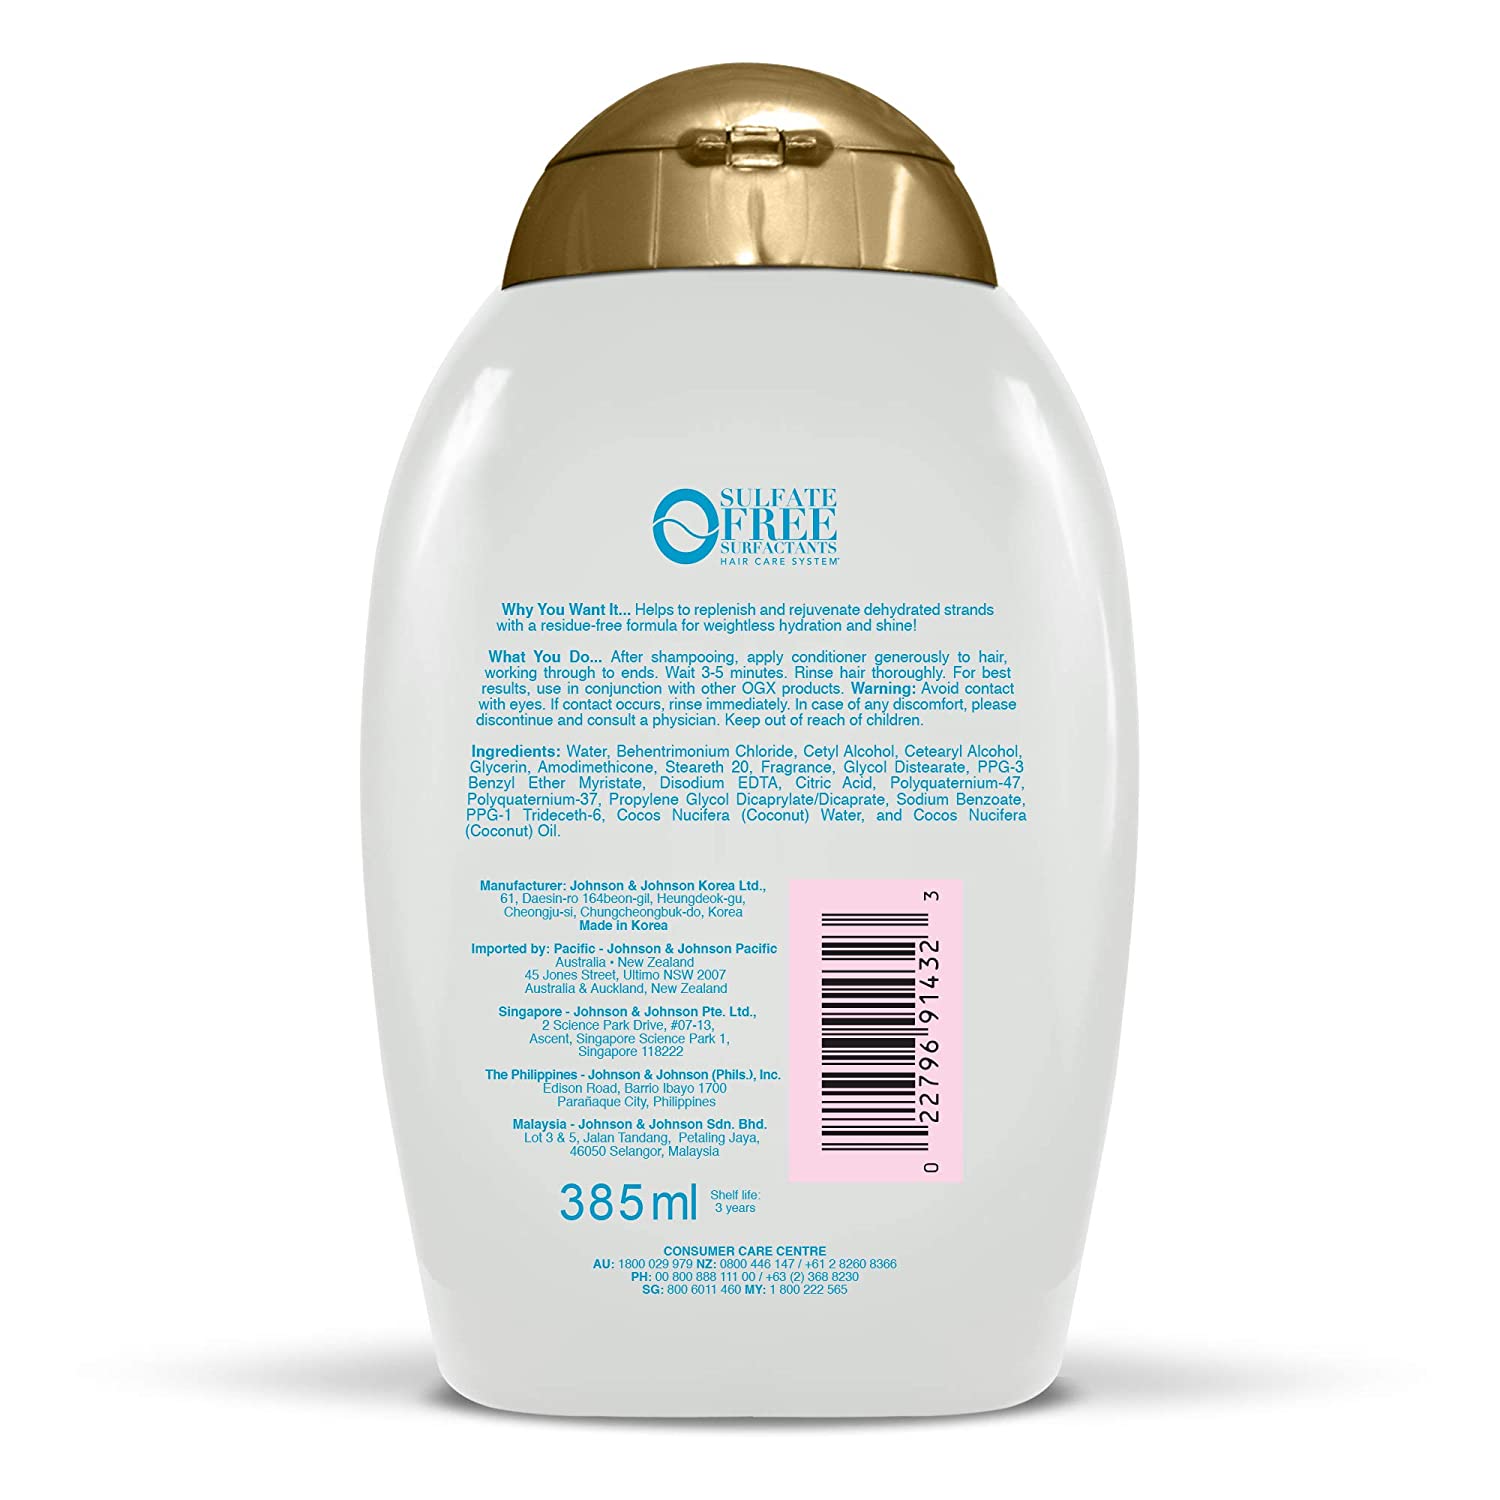 Buy OGX Weightless Hydration Coconut Water Conditioner - 385ml in Pakistan